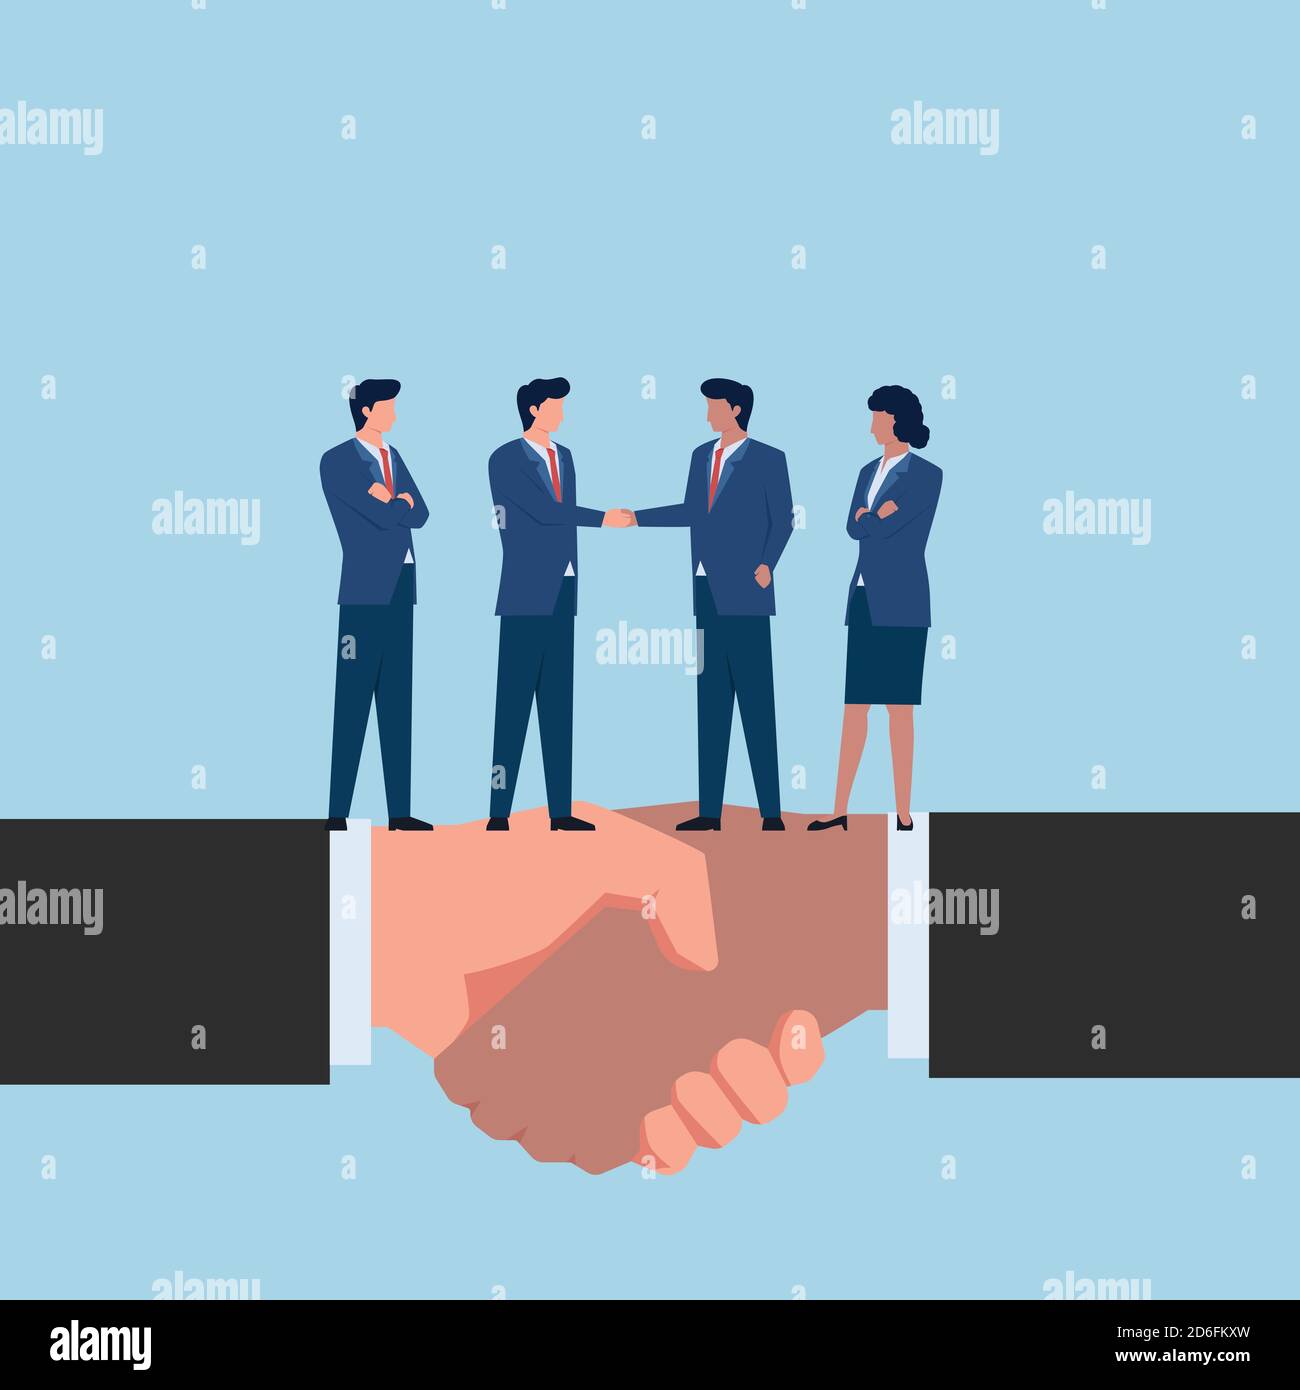 Black and white hands handshake metaphor of human rights and racism. Stock Vector